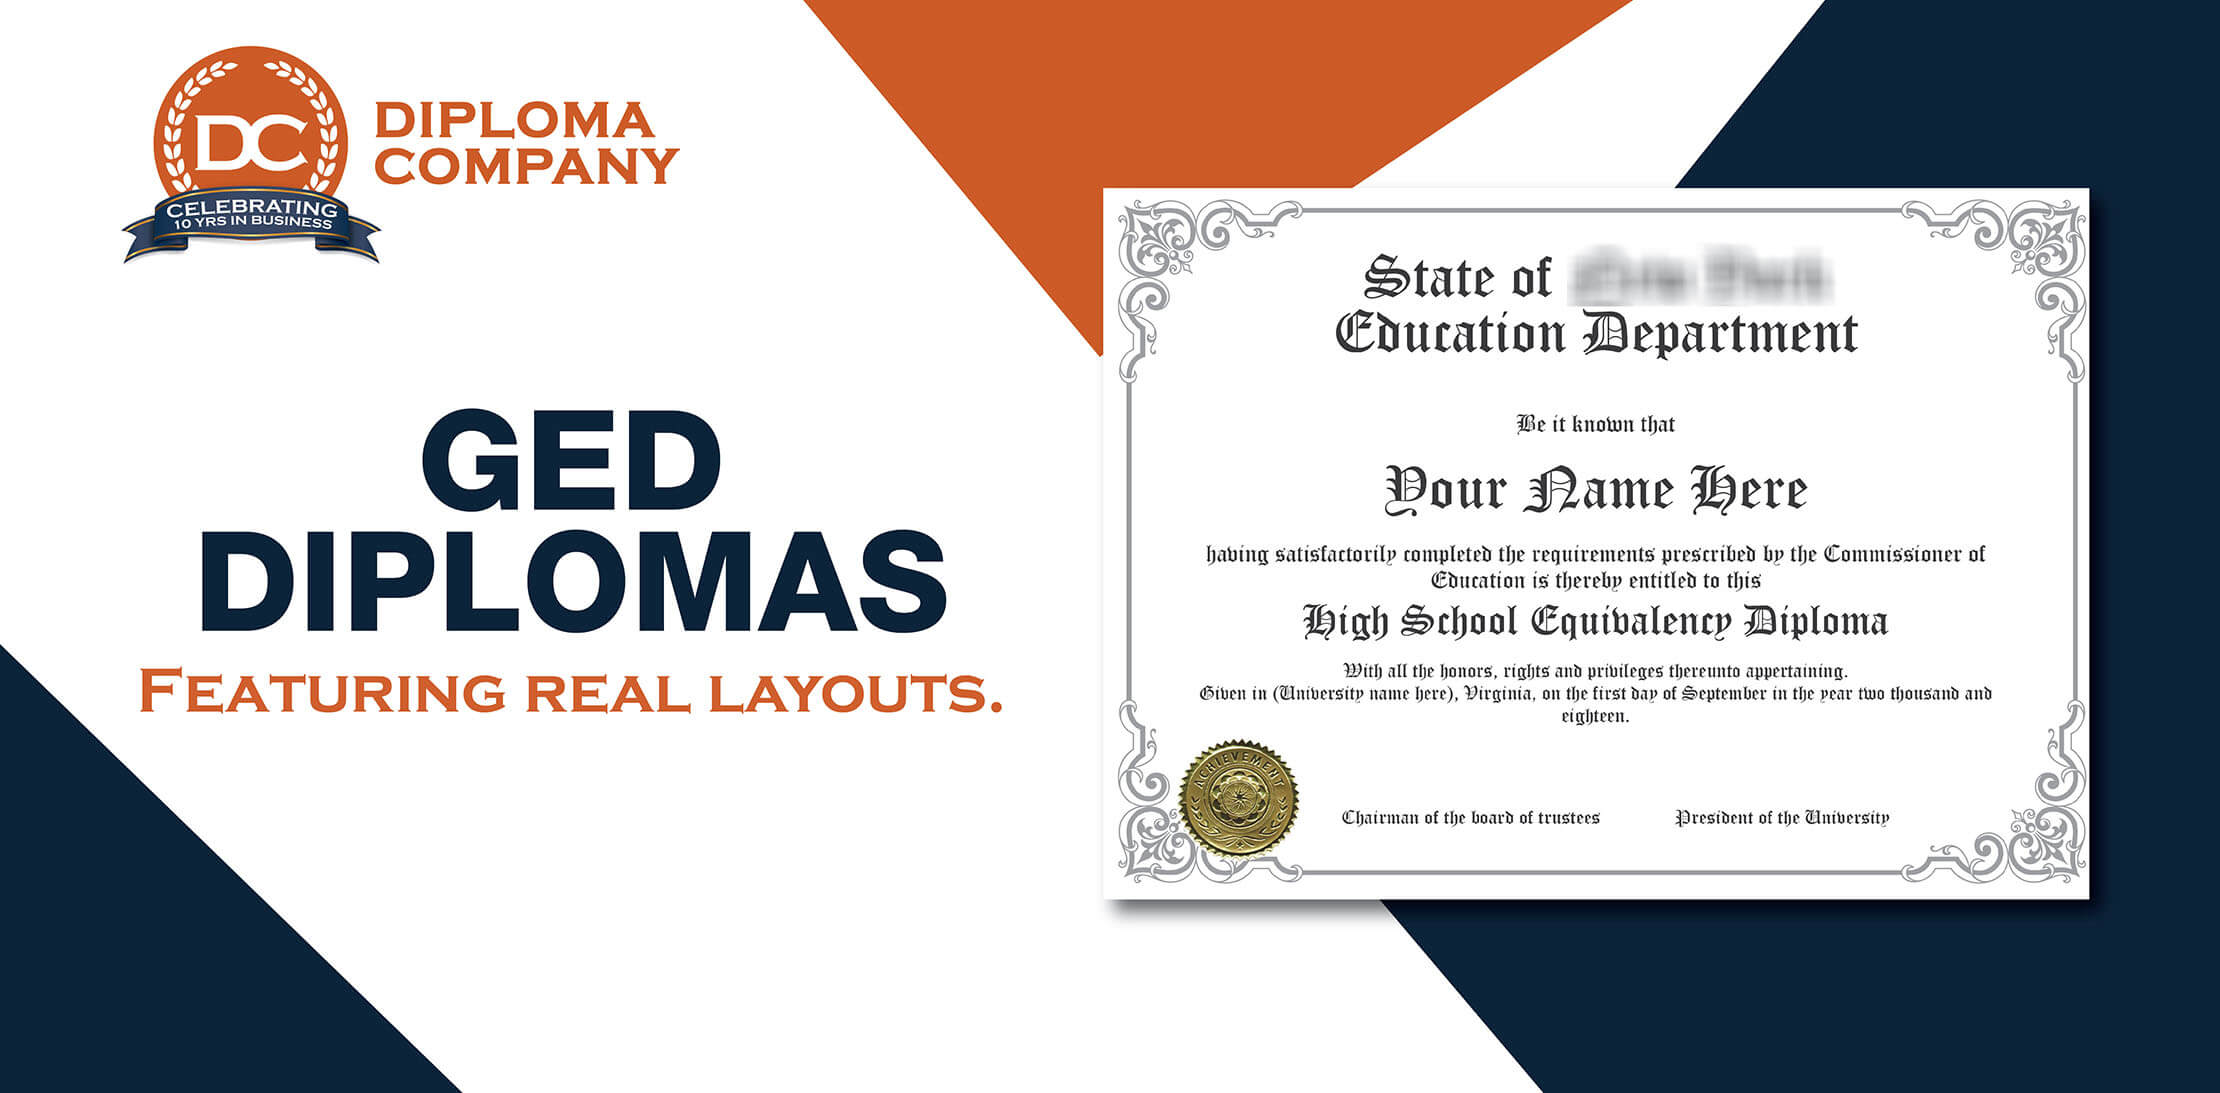 Buy fake GED diplomas with satisfaction guarantee! Featuring real GED layouts, realistic school board seals, and more! Ships fast with free order proof.